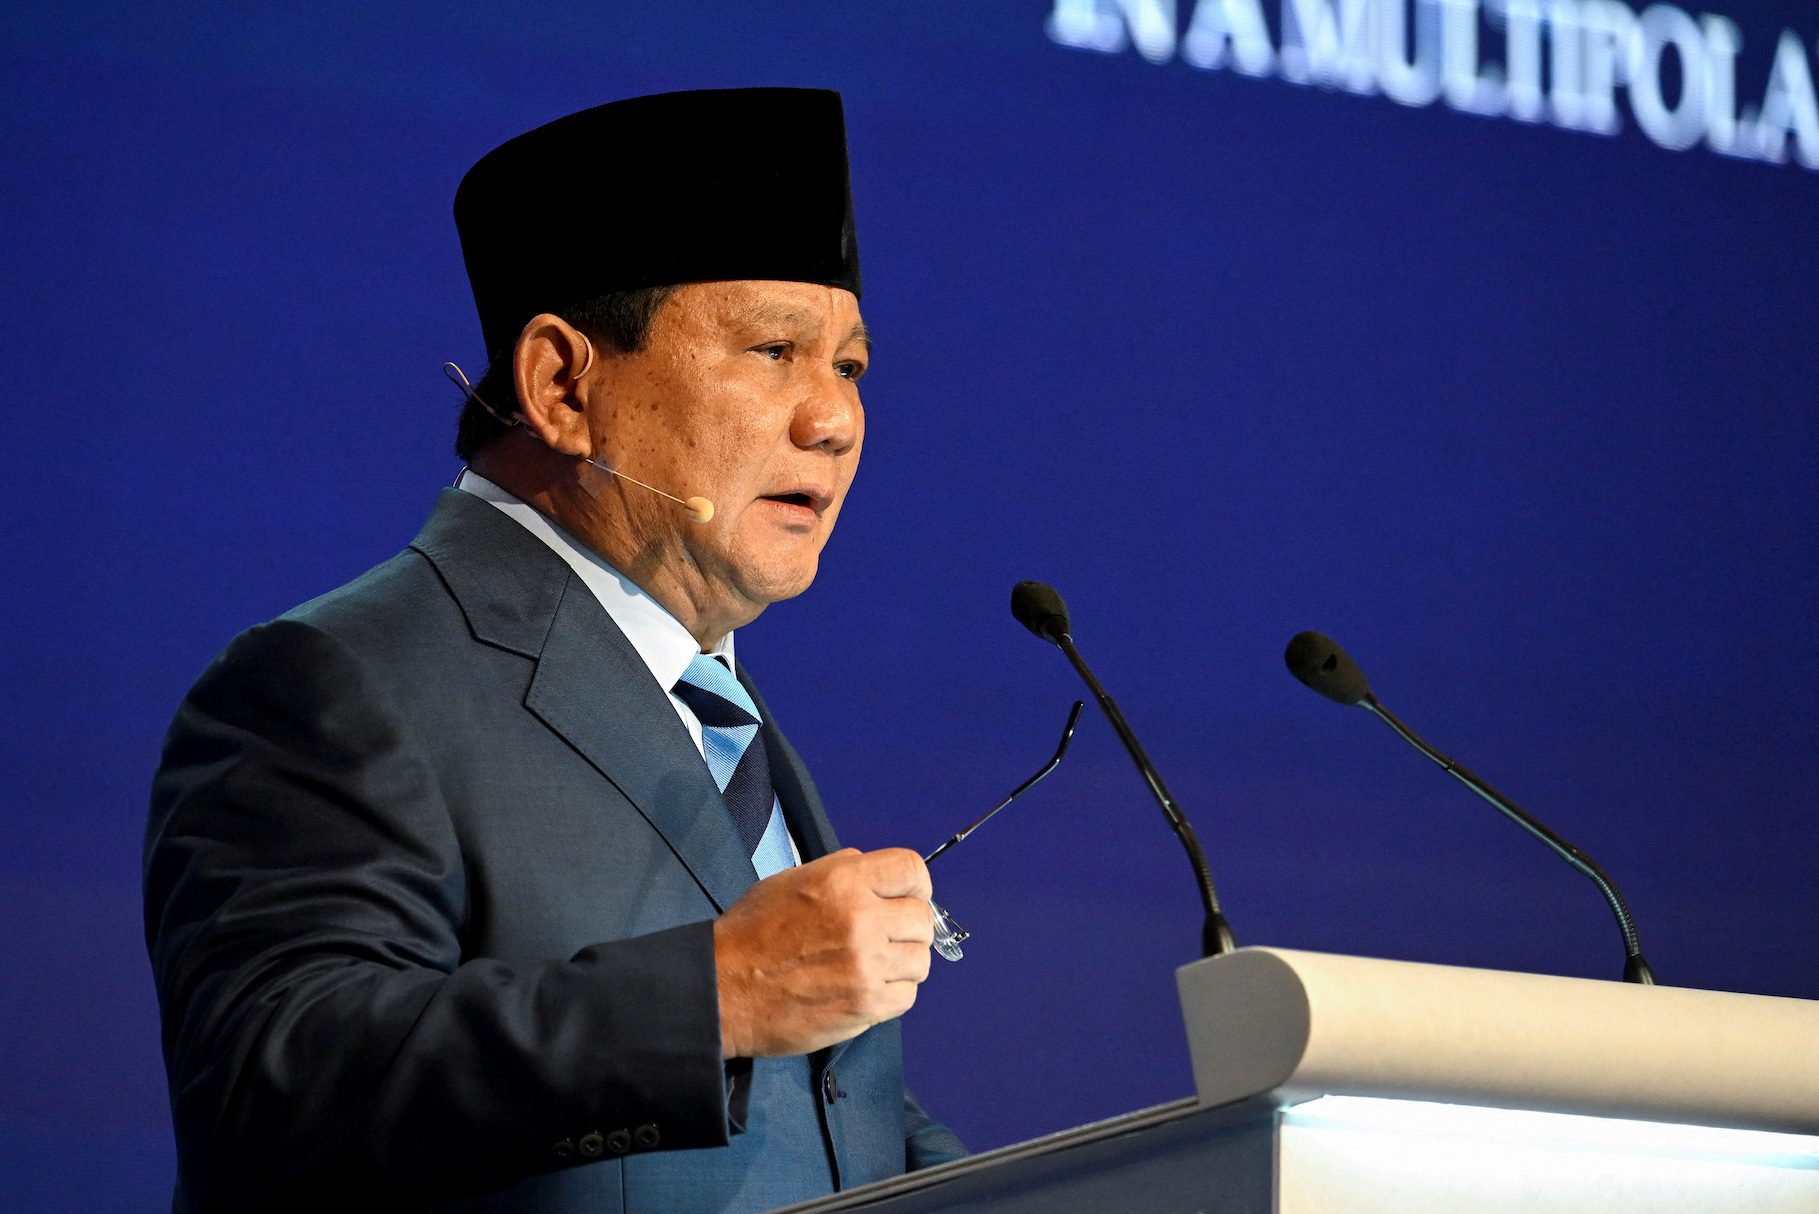 Indonesia defense minister Prabowo signals another run for presidency